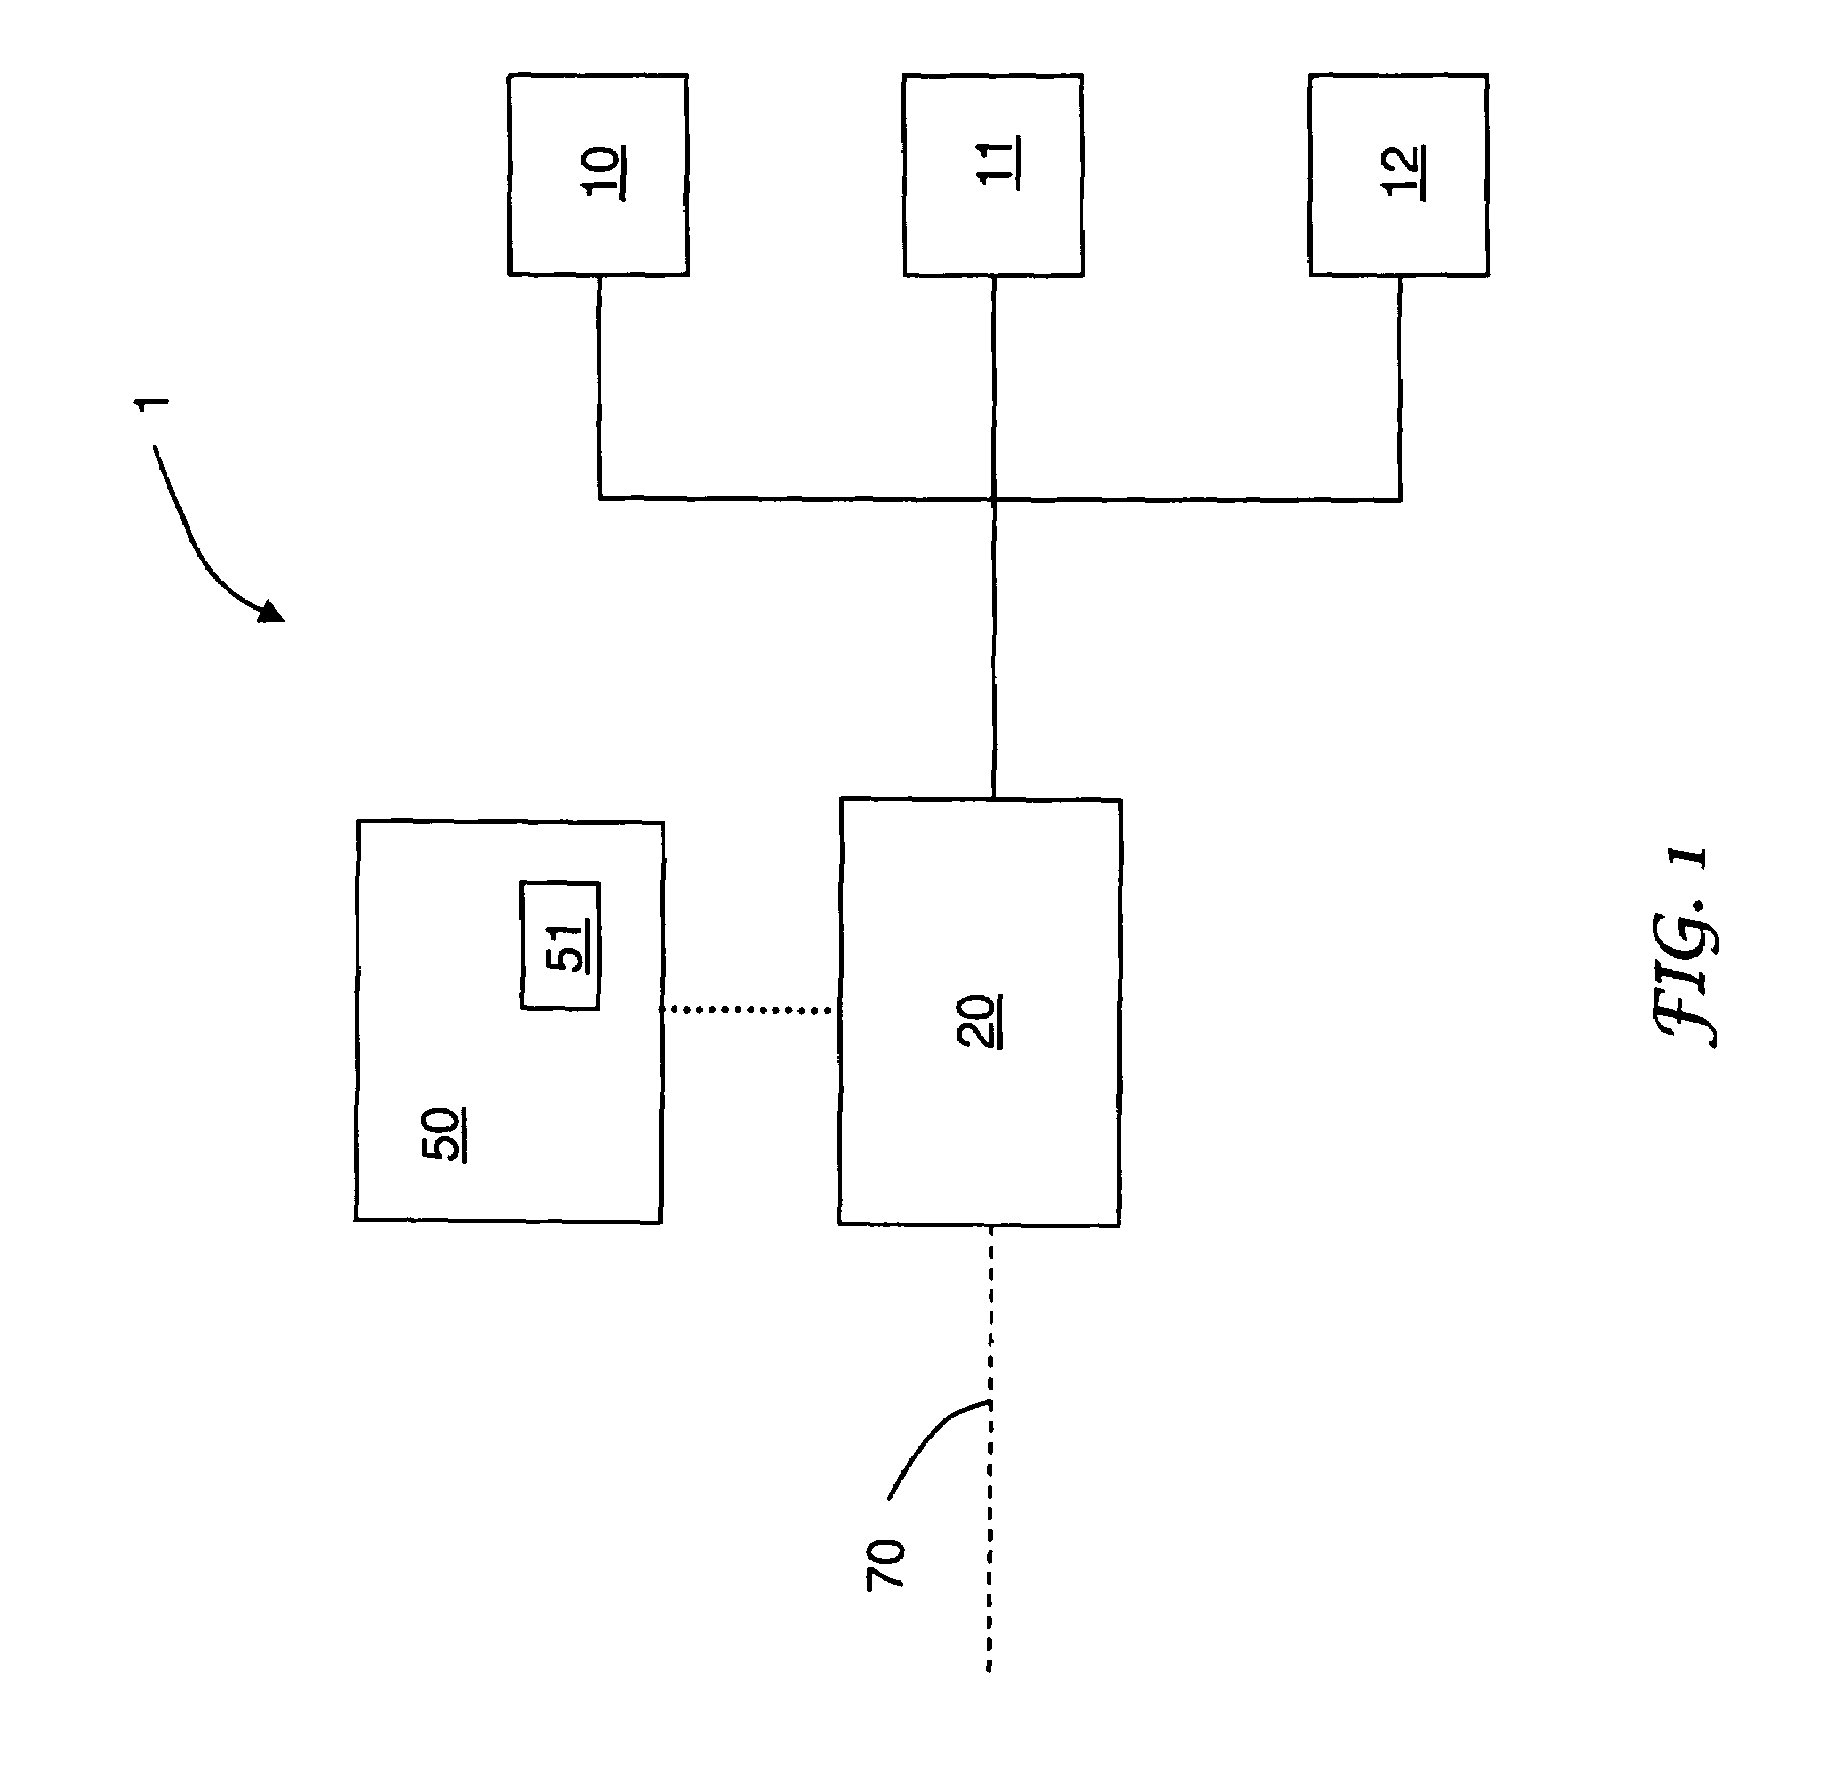 Hydrogen dispensing station and method of operating the same